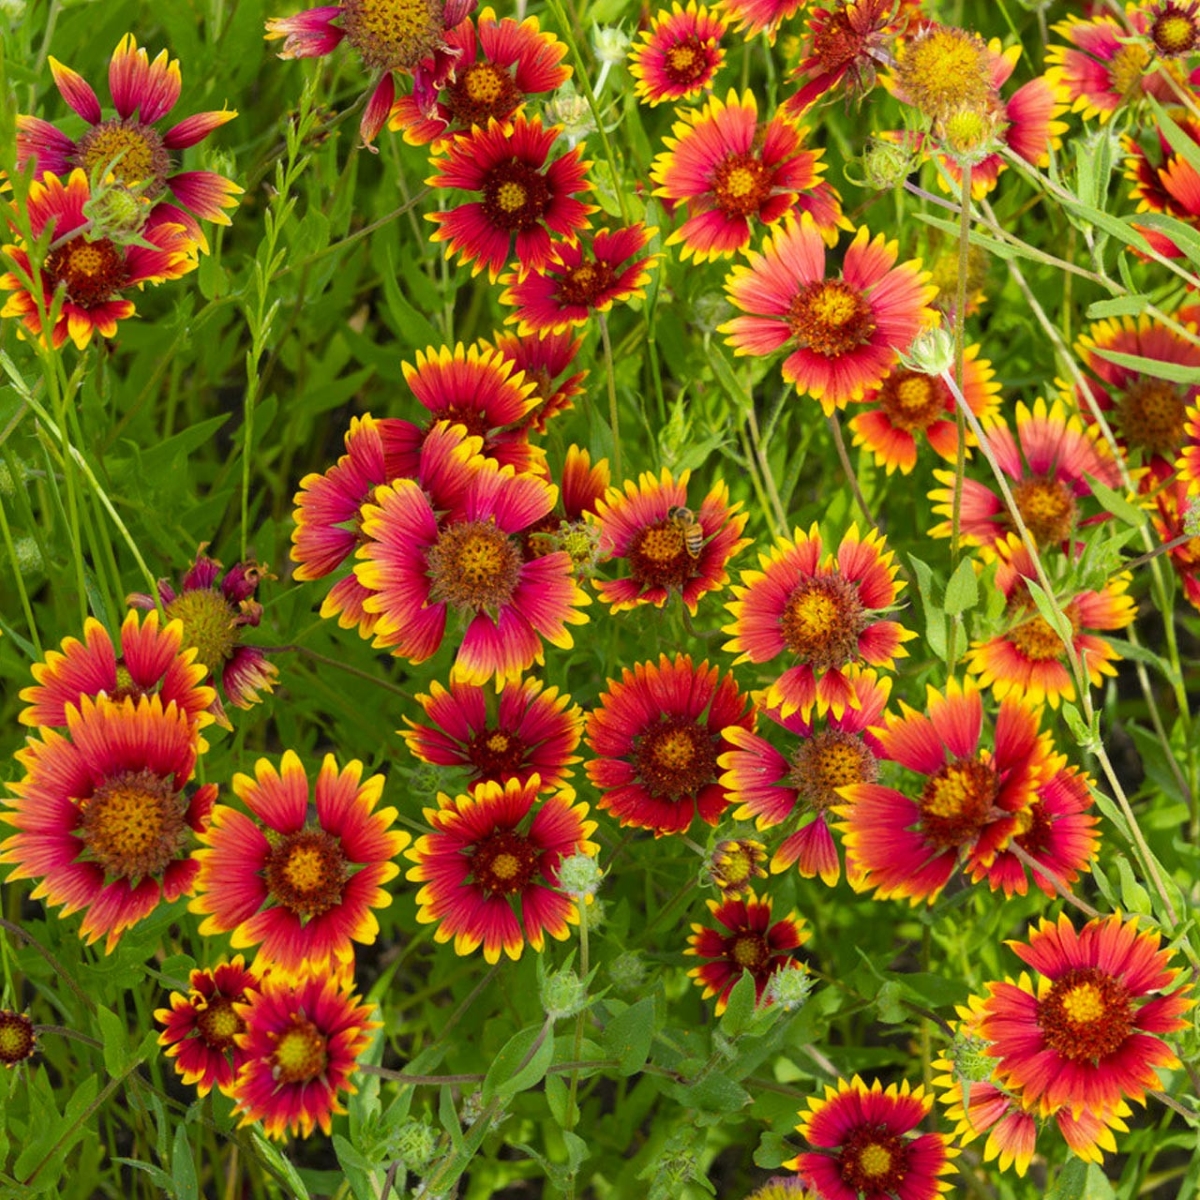 flowers that attract bees - red flowers with yellow tips